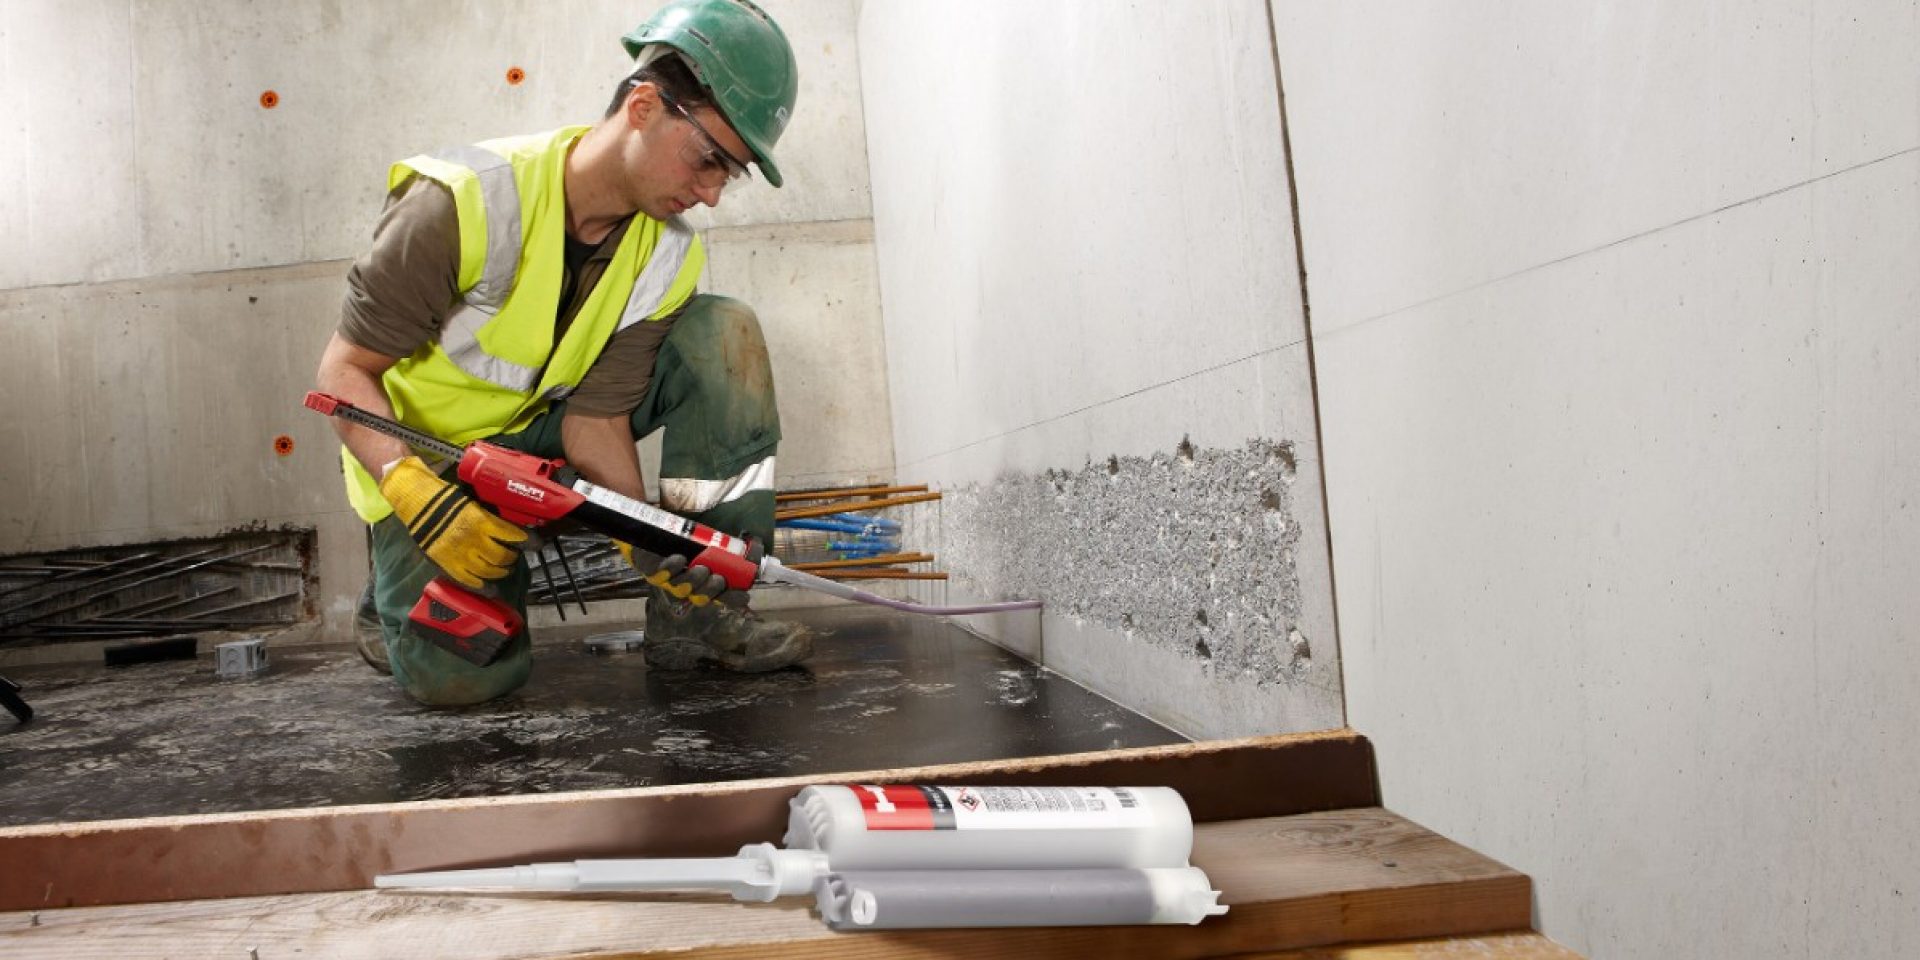 Find out how to work with chemical  products safely on the construction site,  with Hilti’s tailor-made health and safety  training.